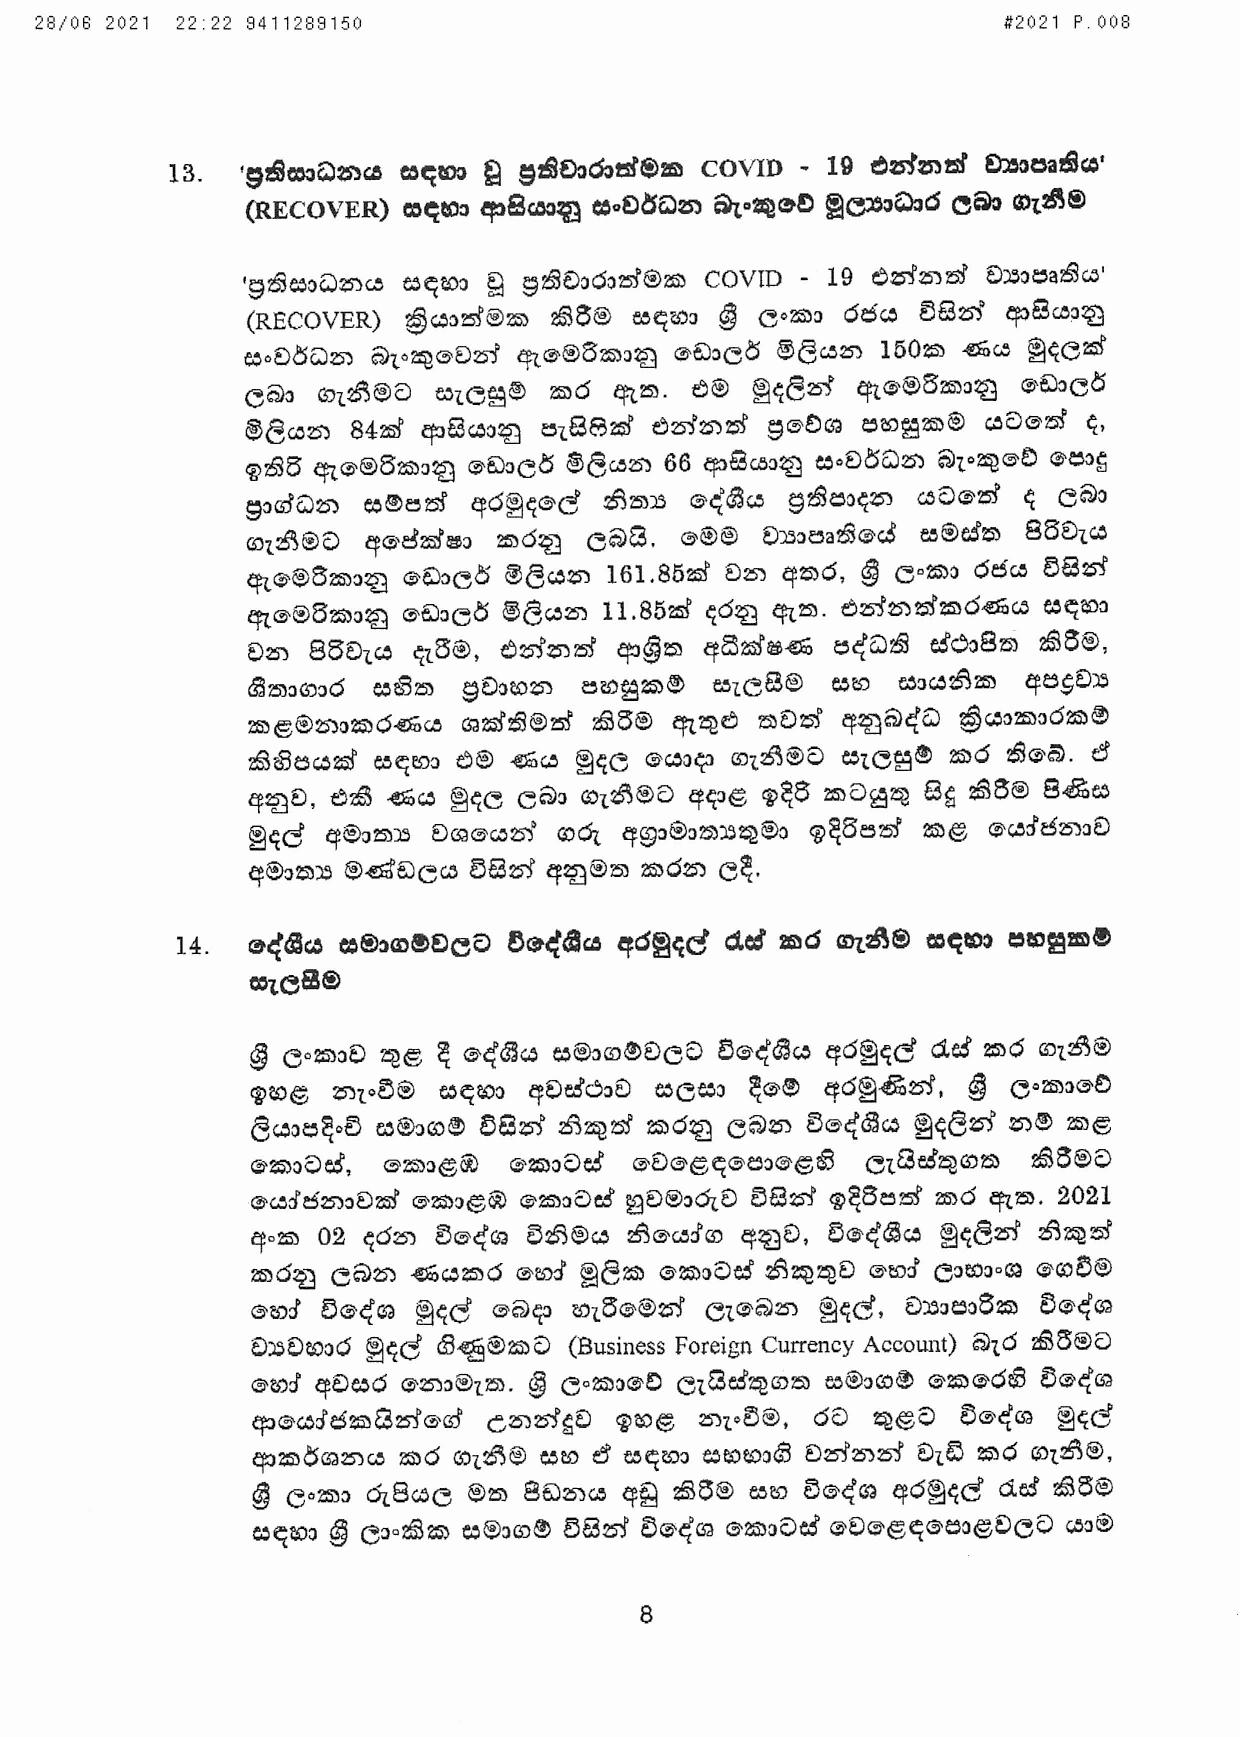 Cabinet Decision on 28.06.2021 page 008